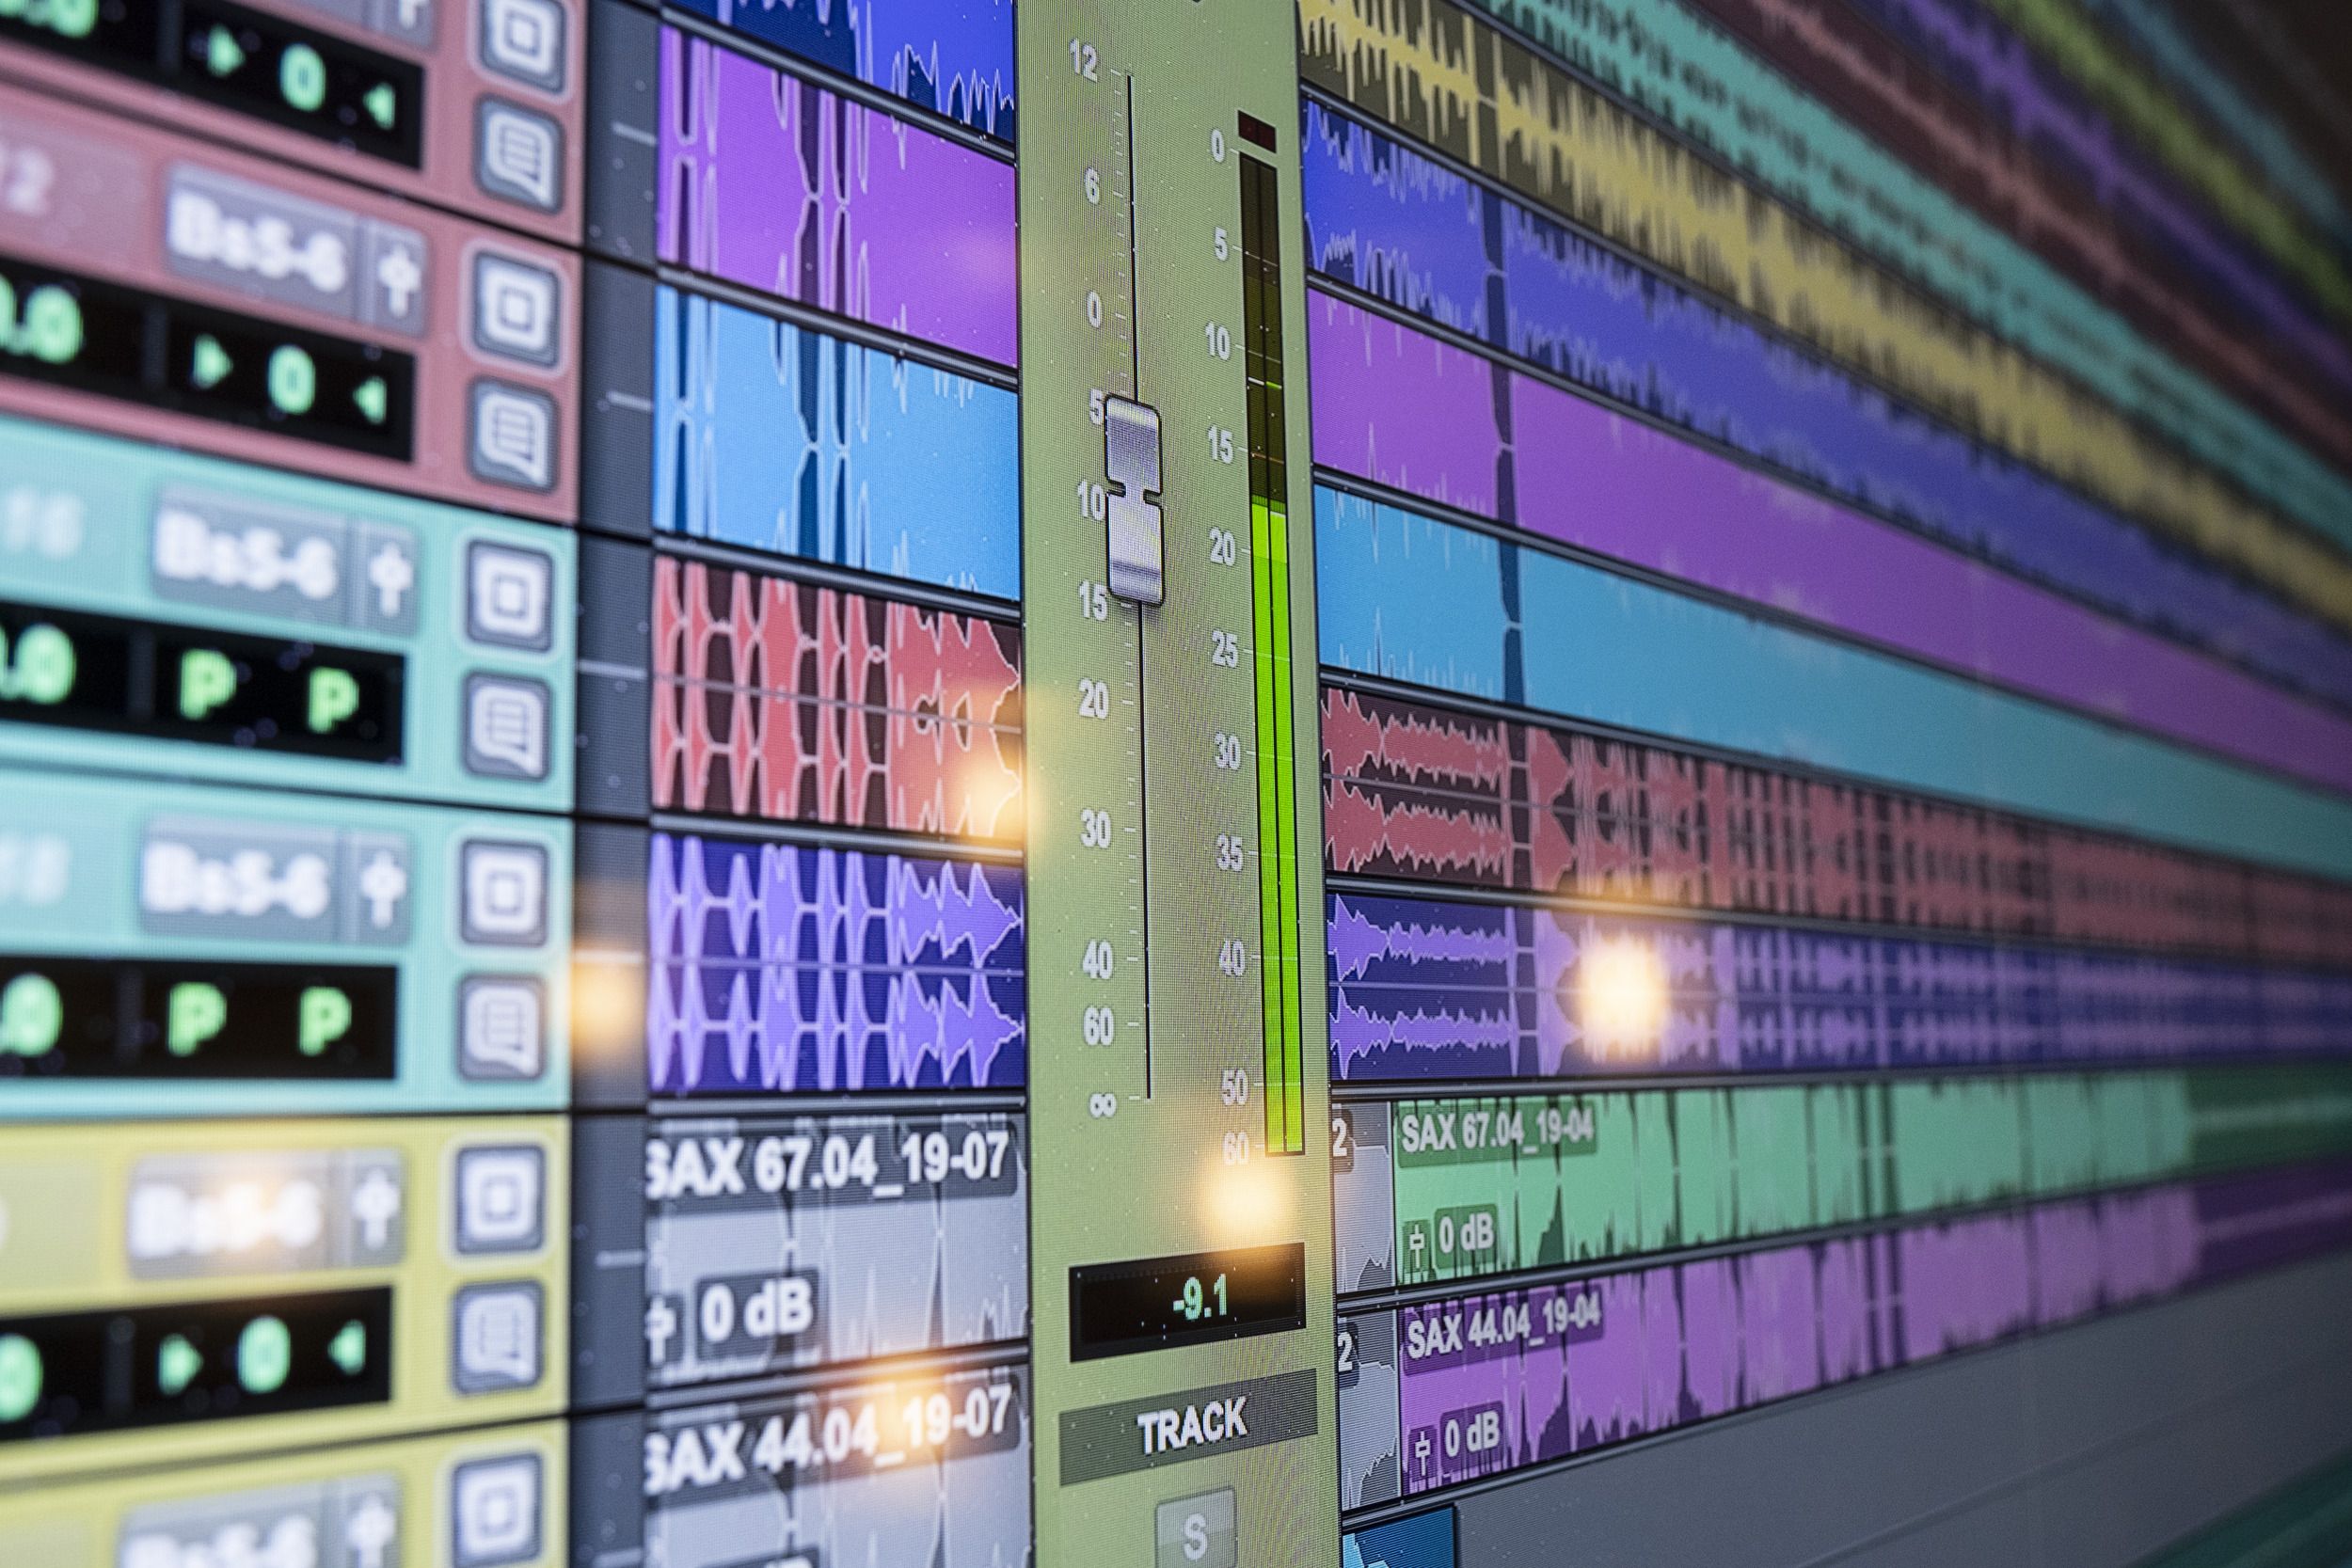 Recording tracks on a screen